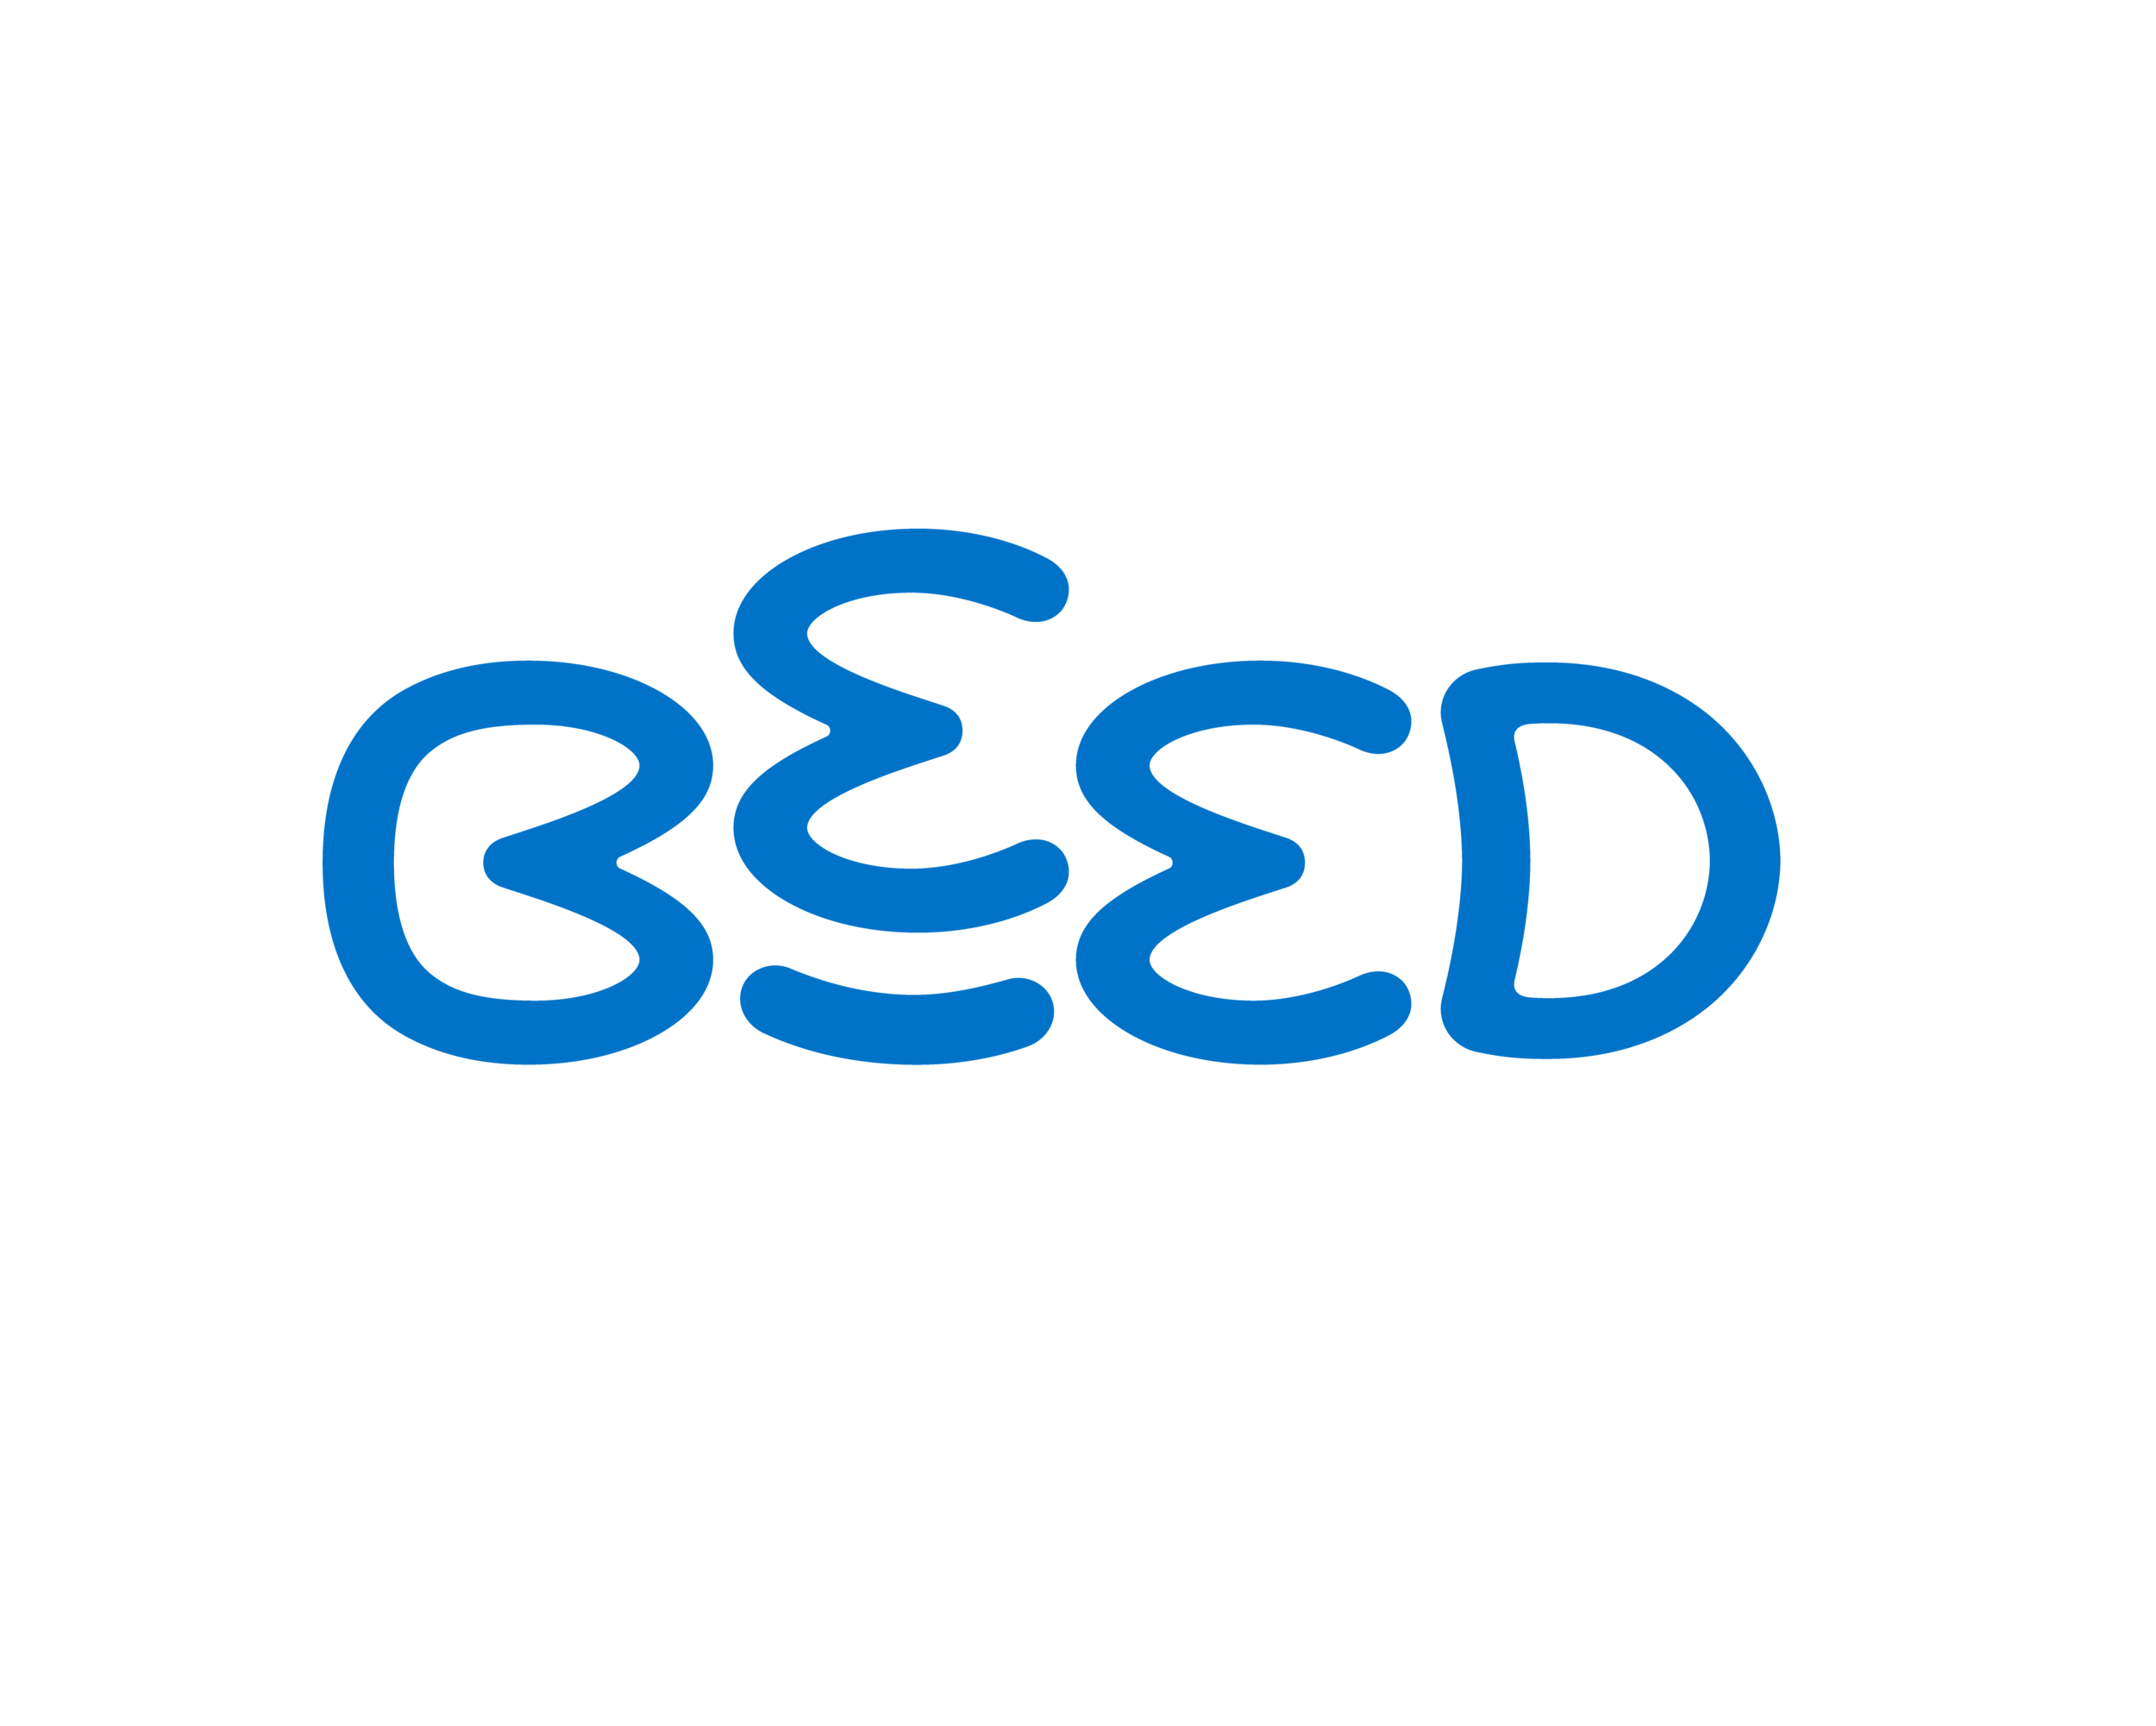 beed-Full-Logo-square.png